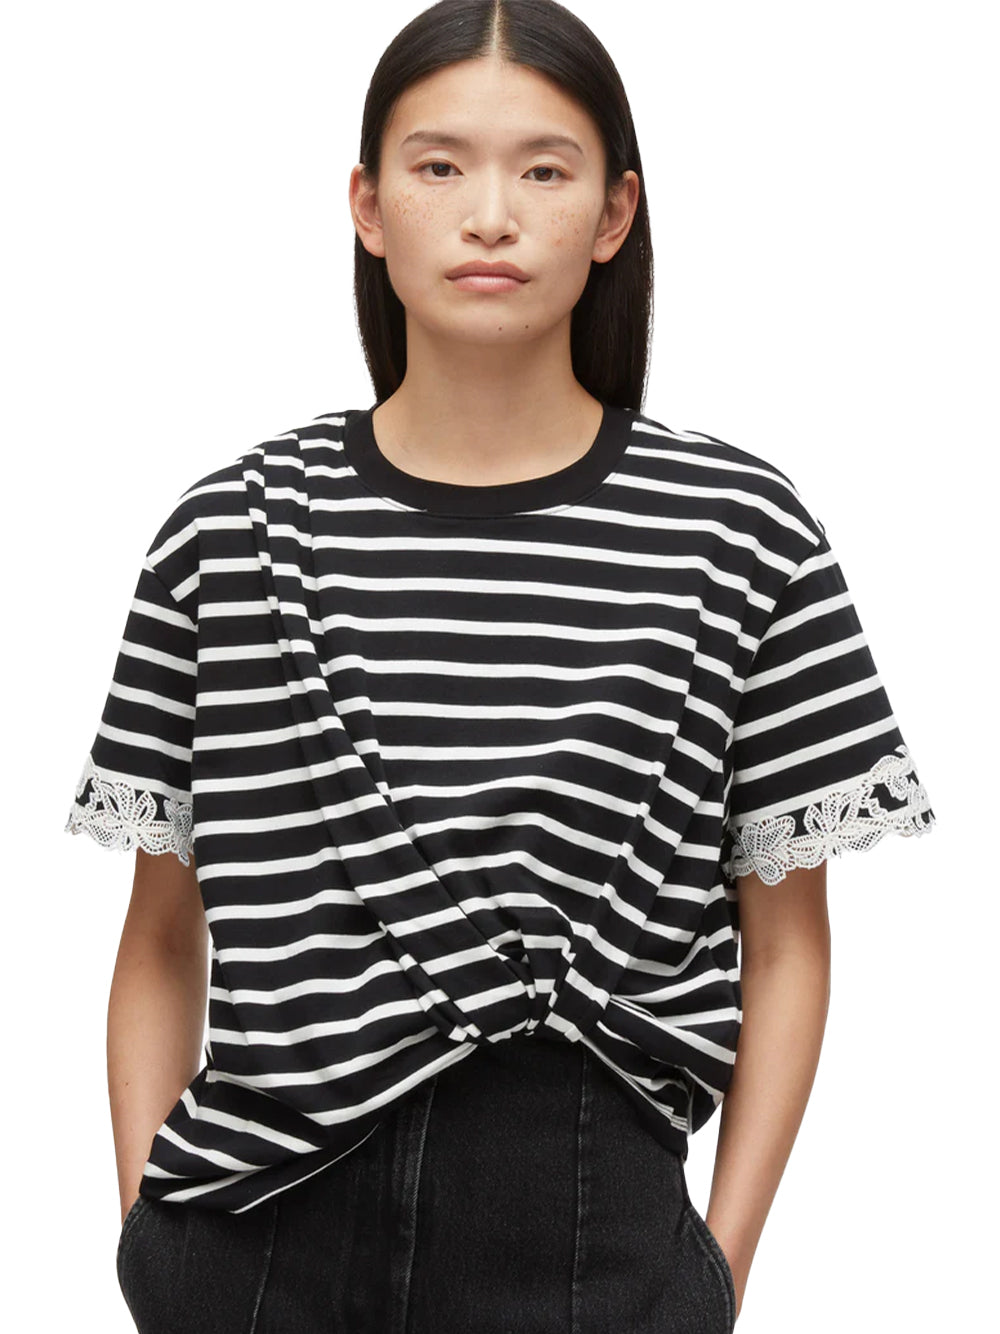 Draped Tee with Lace Embroidery (BLK Multi Striped)